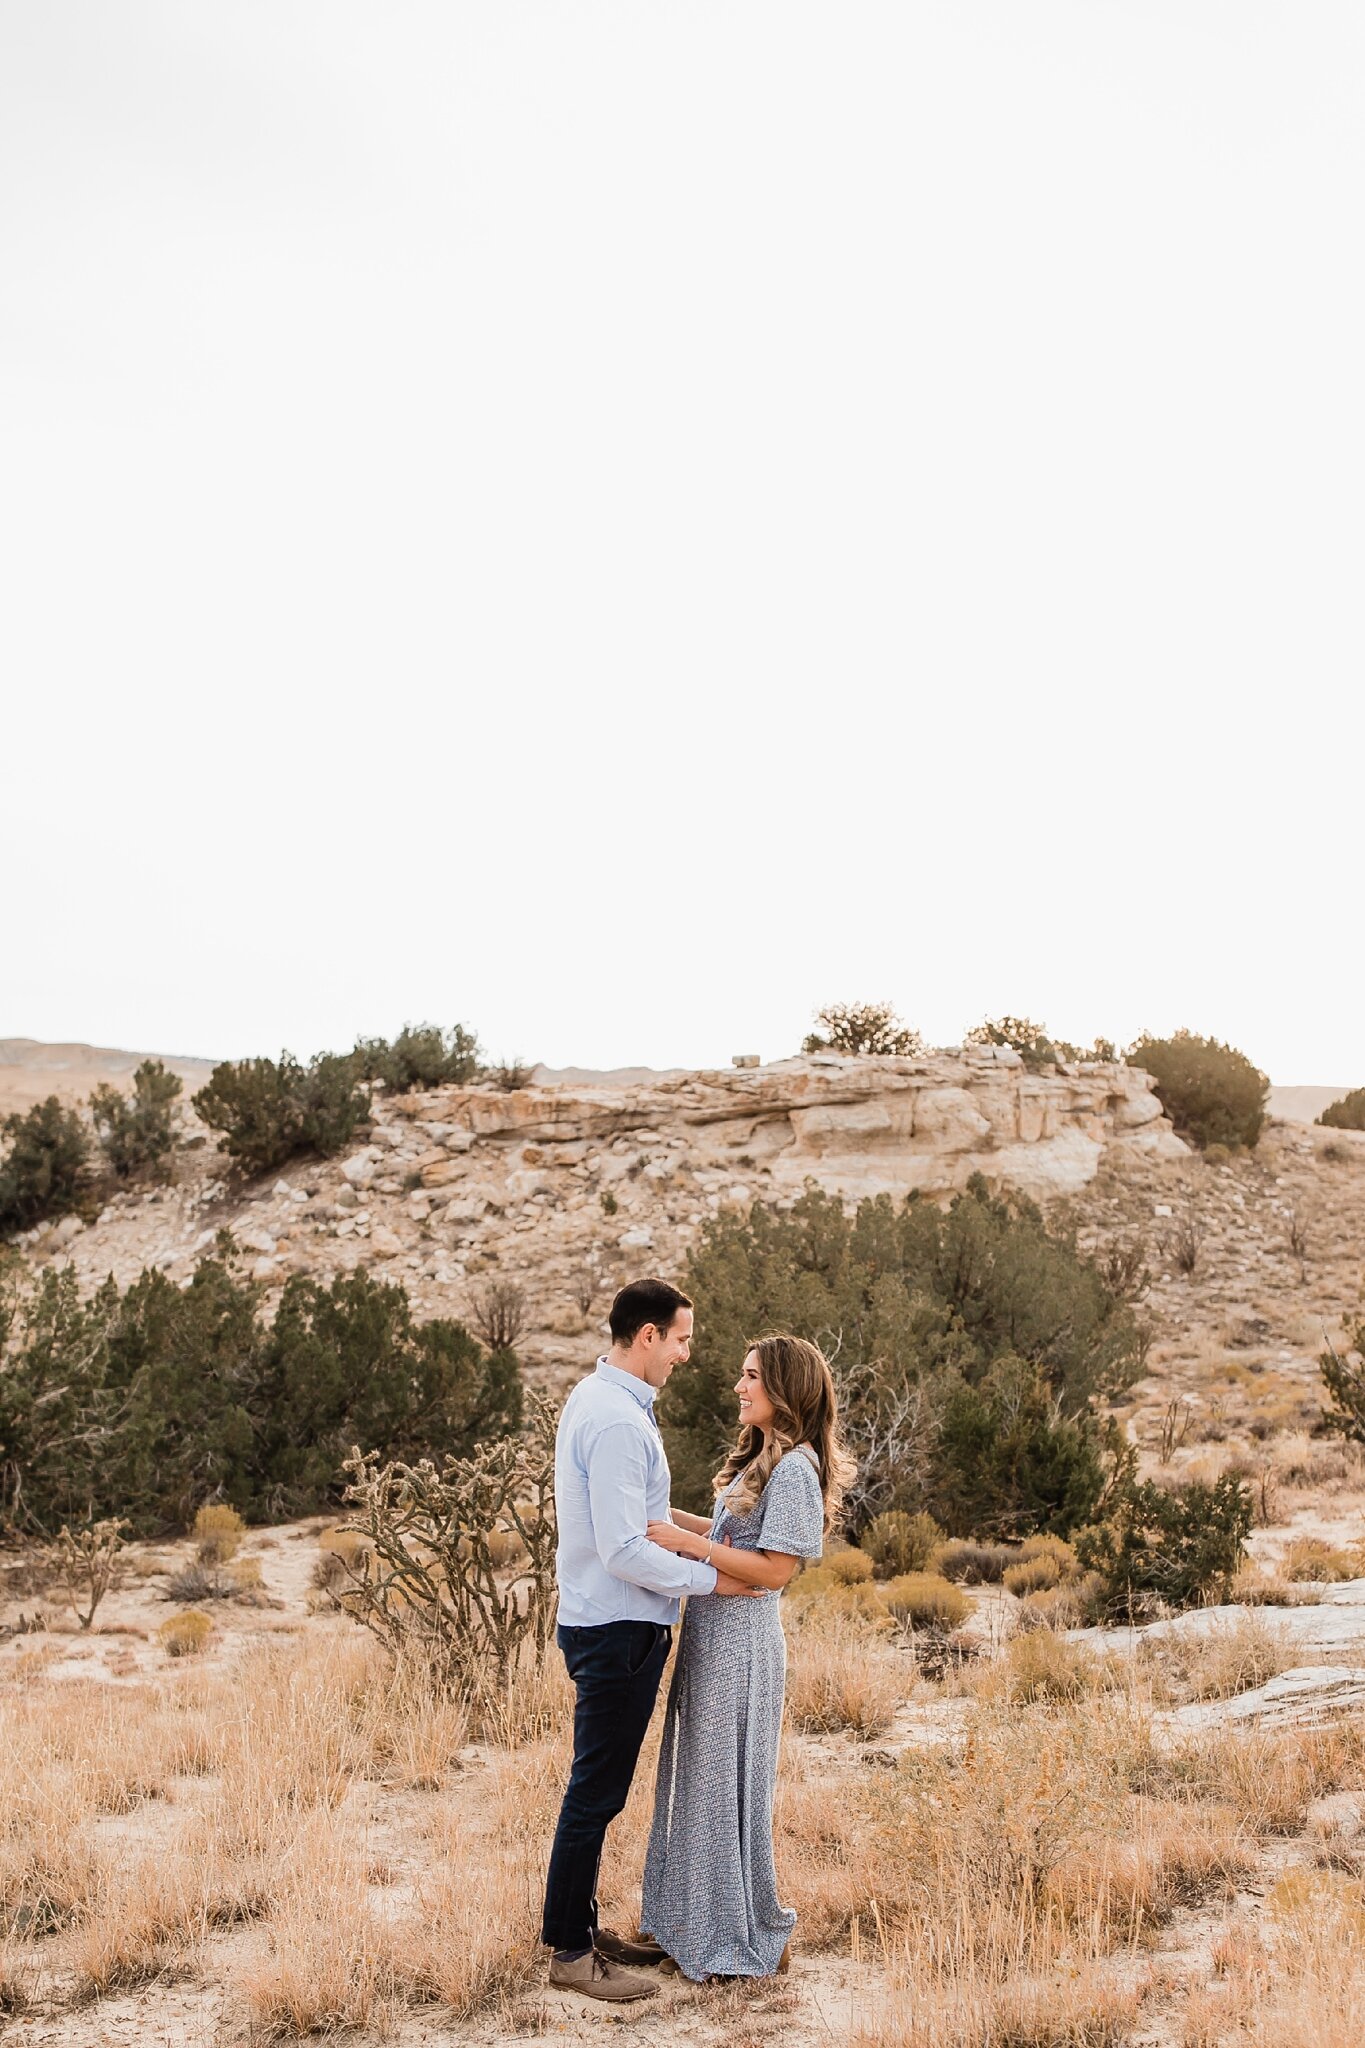 Evan + Jocelyn, a Heavenly New Mexico Engagement — Alicia Lucia Photography Albuquerque and Santa Fe New Mexico Wedding and Portrait Photographer pic